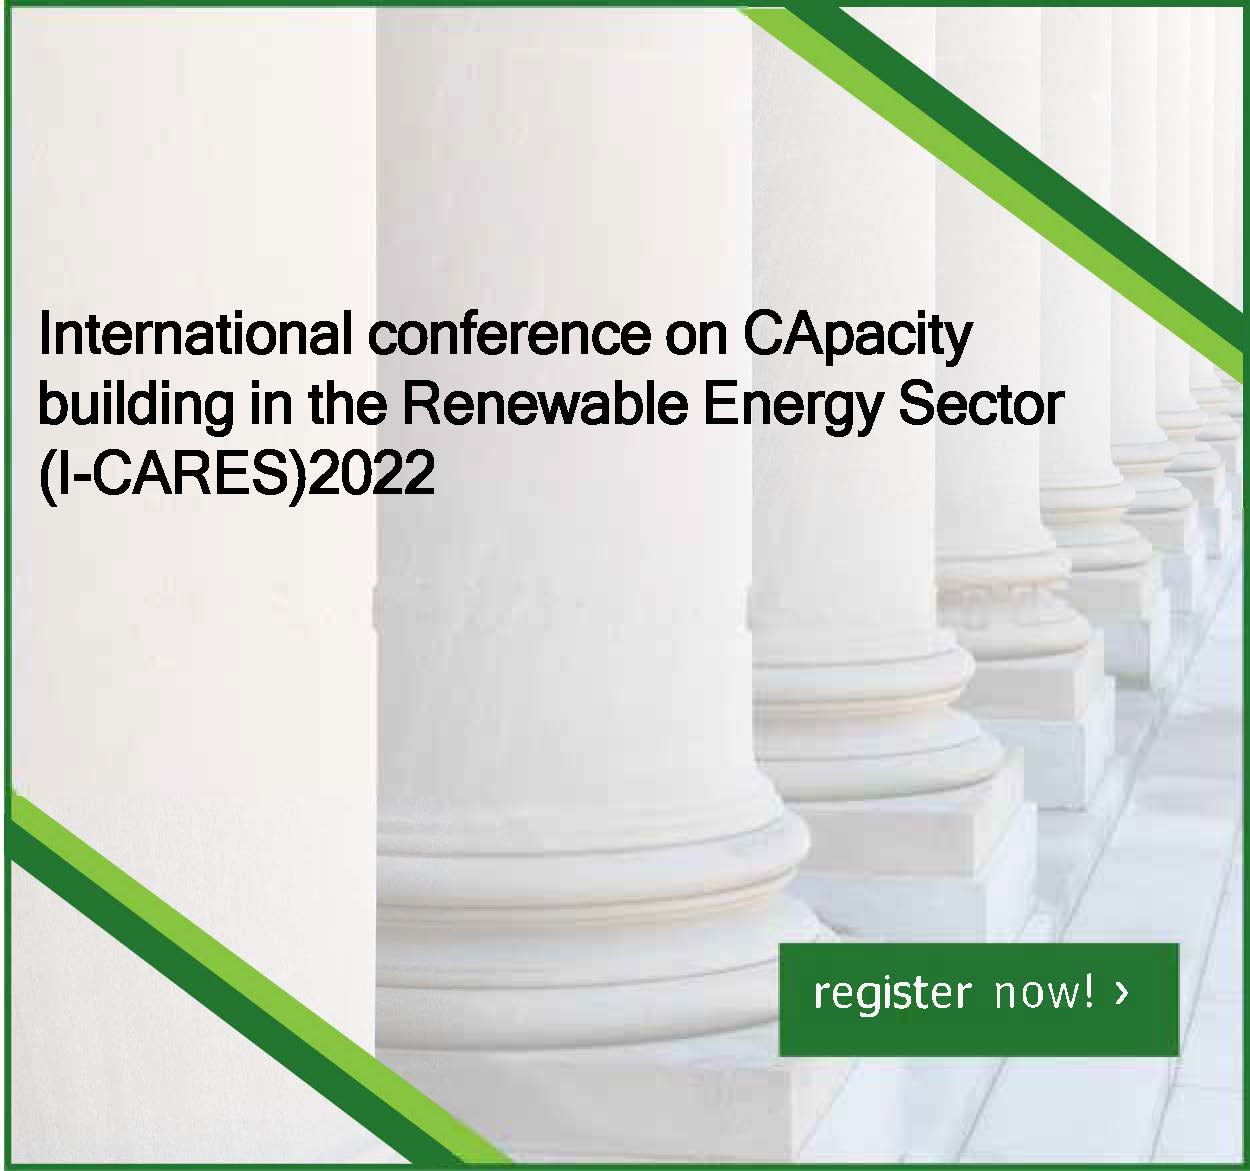 International conference on CApacity building in the Renewable Energy Sector (I-CARES)2022 